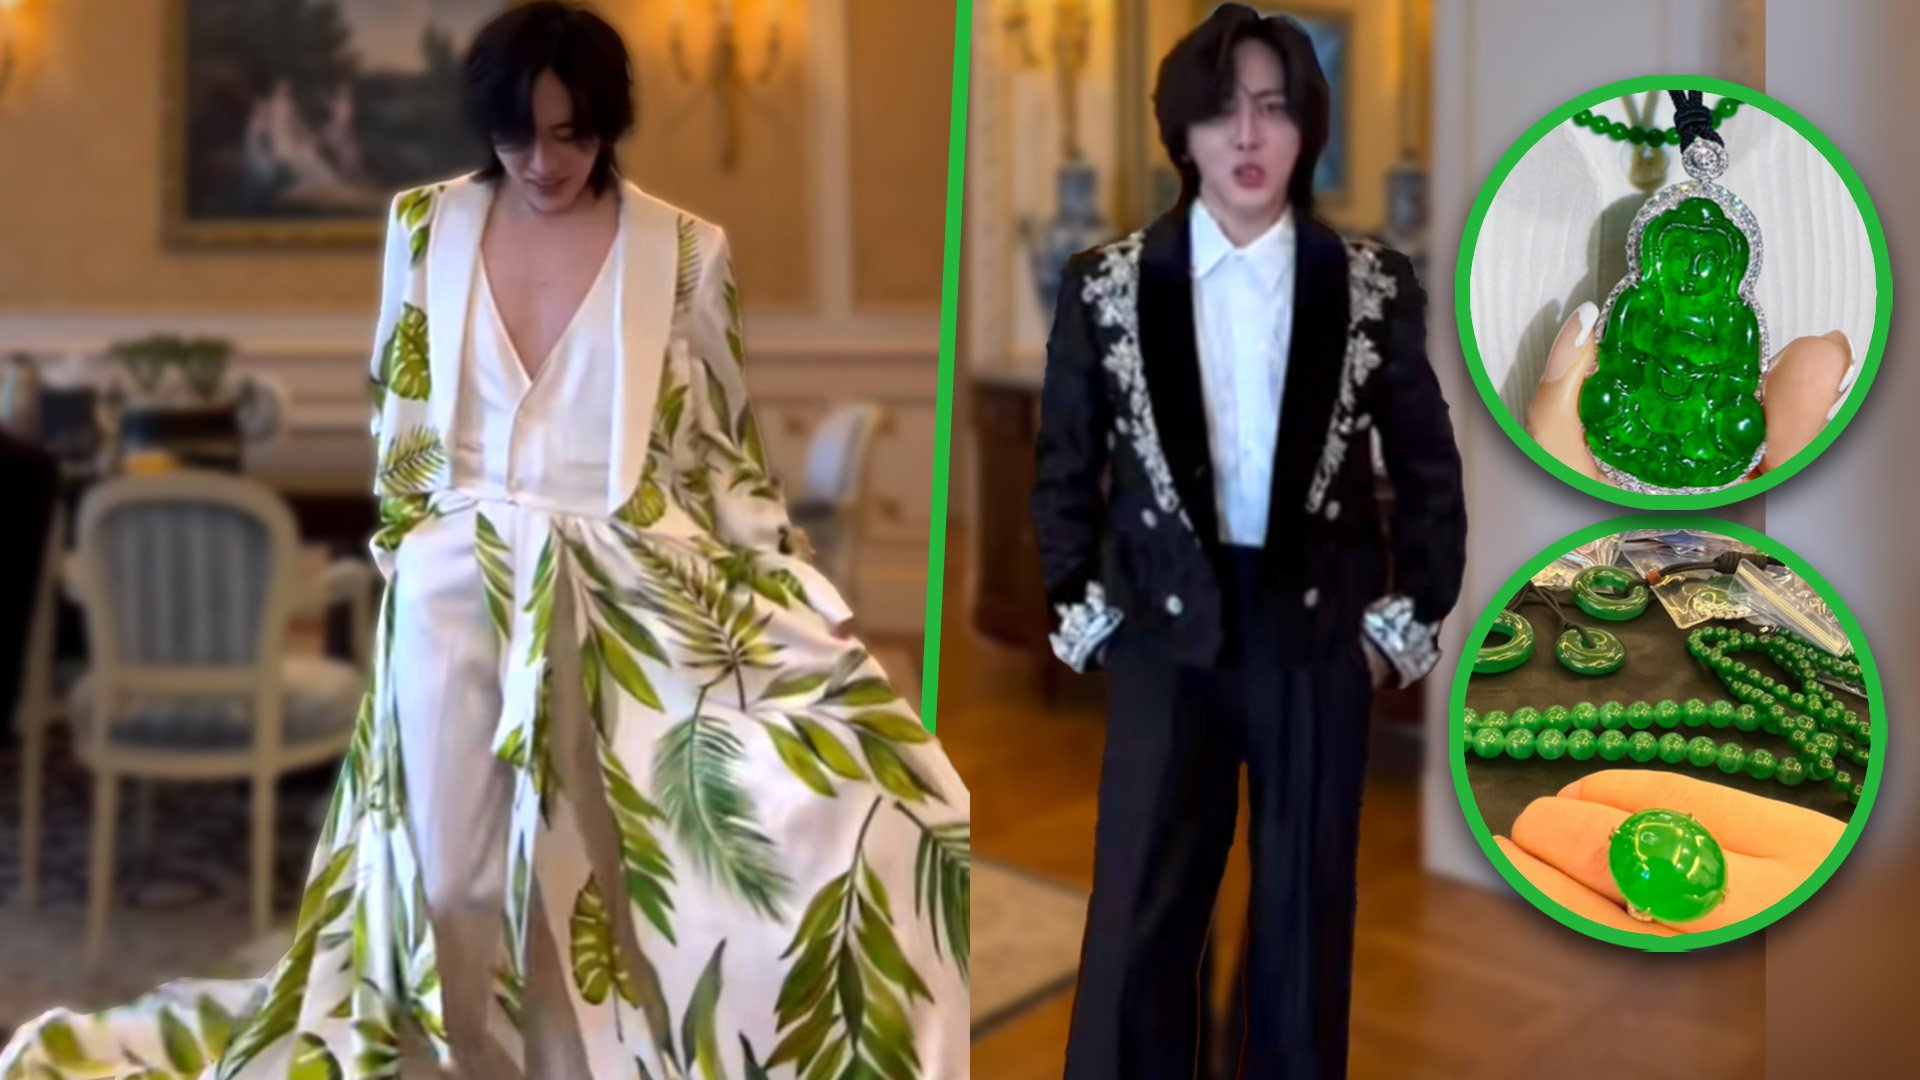 An online influencer in China who owns seven properties worth US$110 million and only goes out wearing clothing and jewellery worth more than US$1.4 million, has stunned social media with the sheer extent of his wealth. Photo: SCMP composite/Douyin/Bilibili